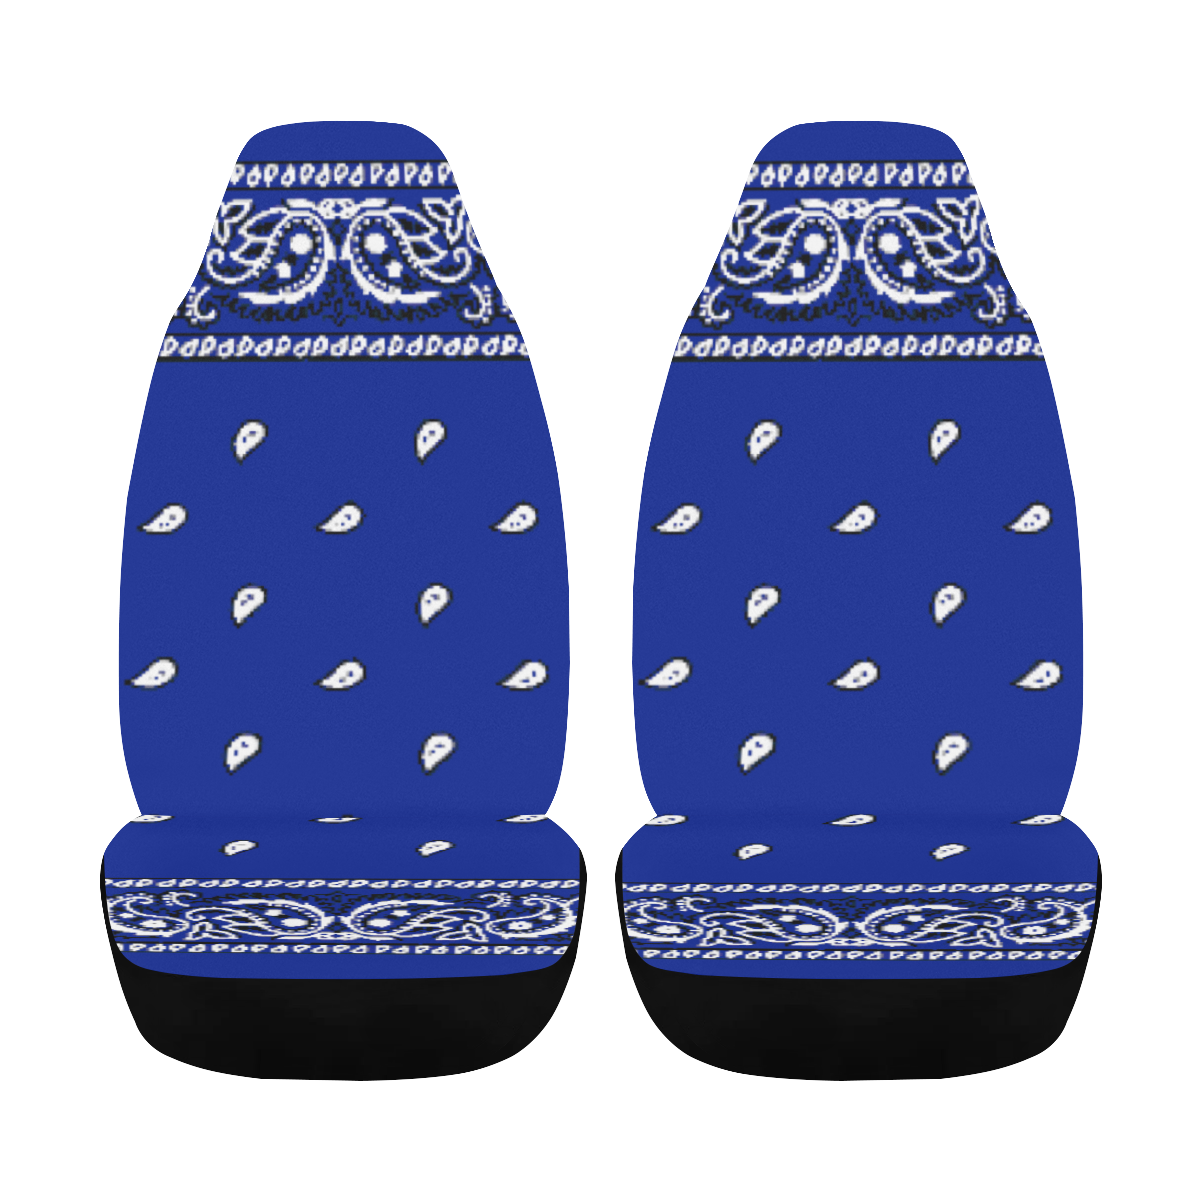 KERCHIEF PATTERN BLUE Car Seat Cover Airbag Compatible (Set of 2)